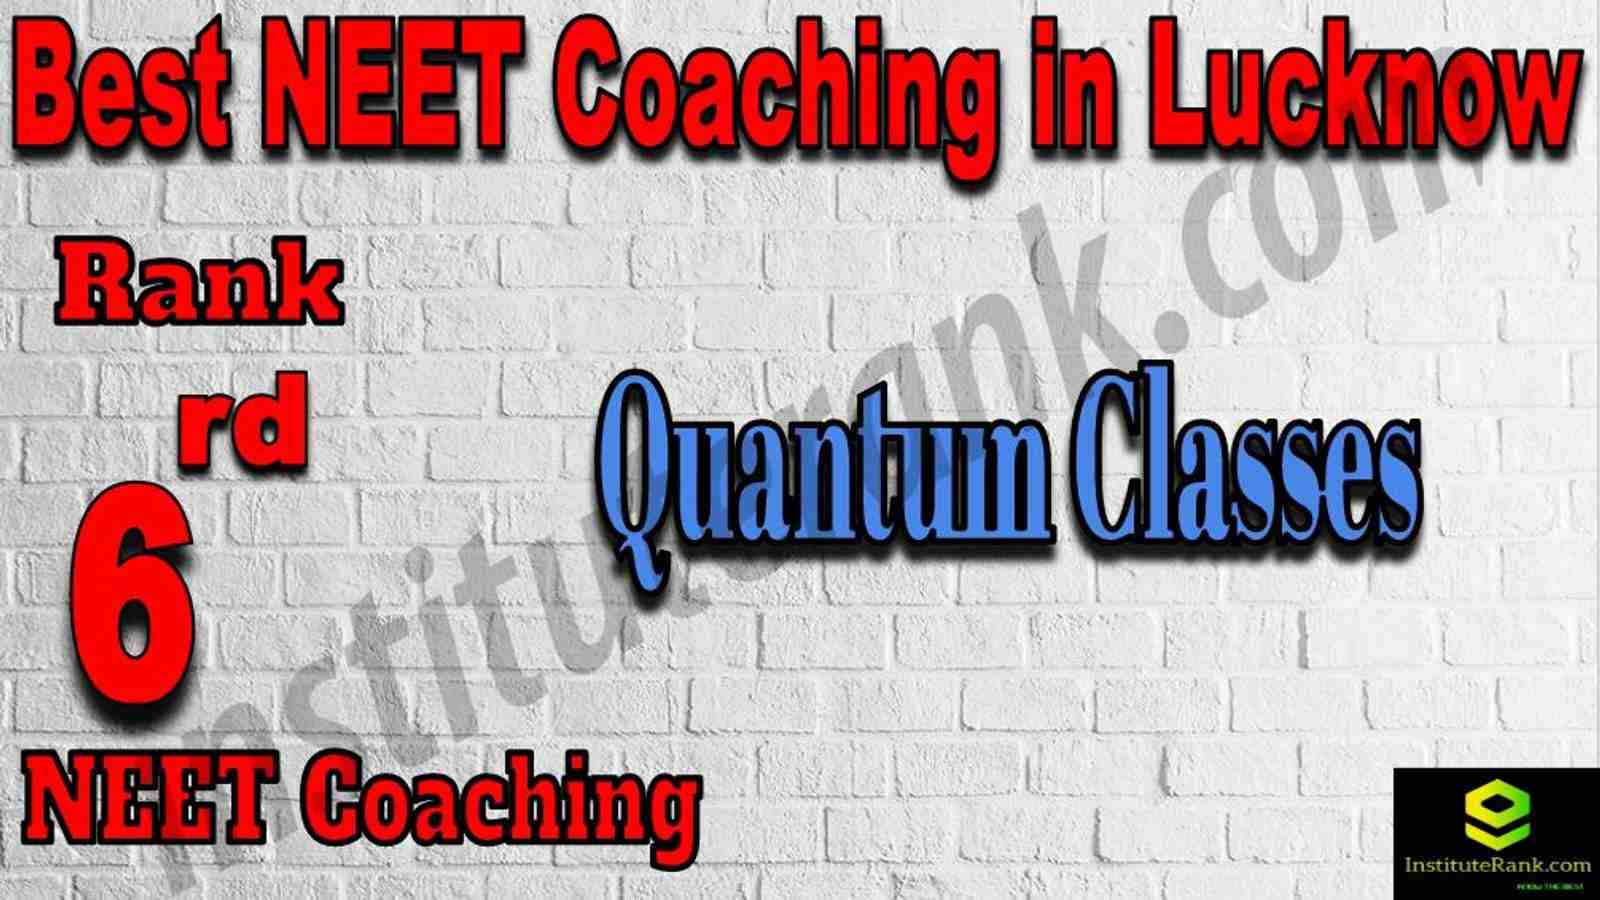 6th Best Neet Coaching in Lucknow